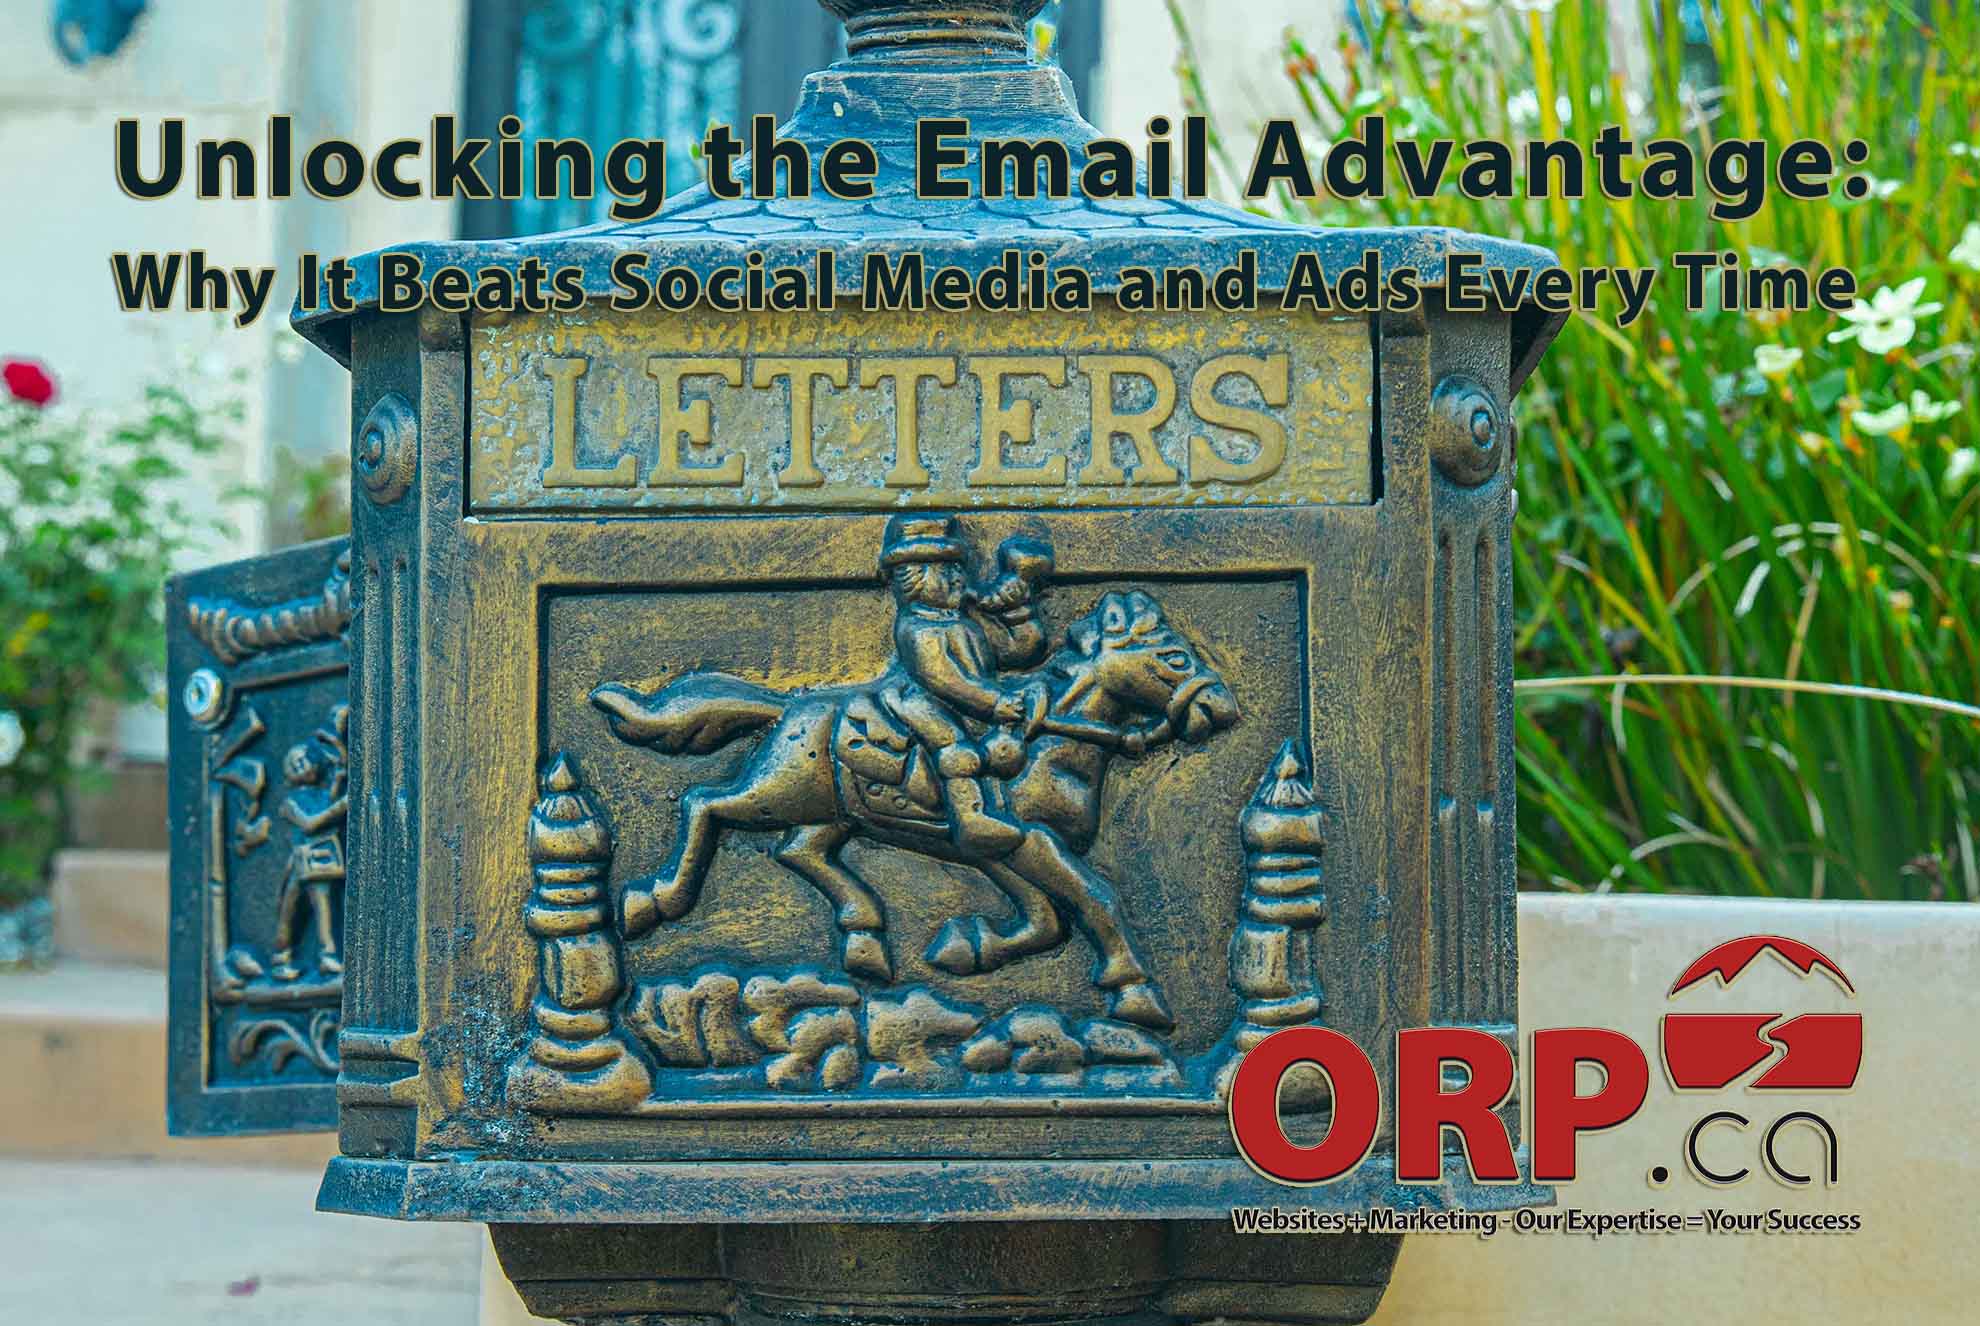 Unlocking the Email Advantage Why It Beats Social Media and Ads Every Time - a Digital Marketing article from ORP.ca Websites + Marketing: Our Expertise  = Your Success - Services for Small Business and Business Professionals"